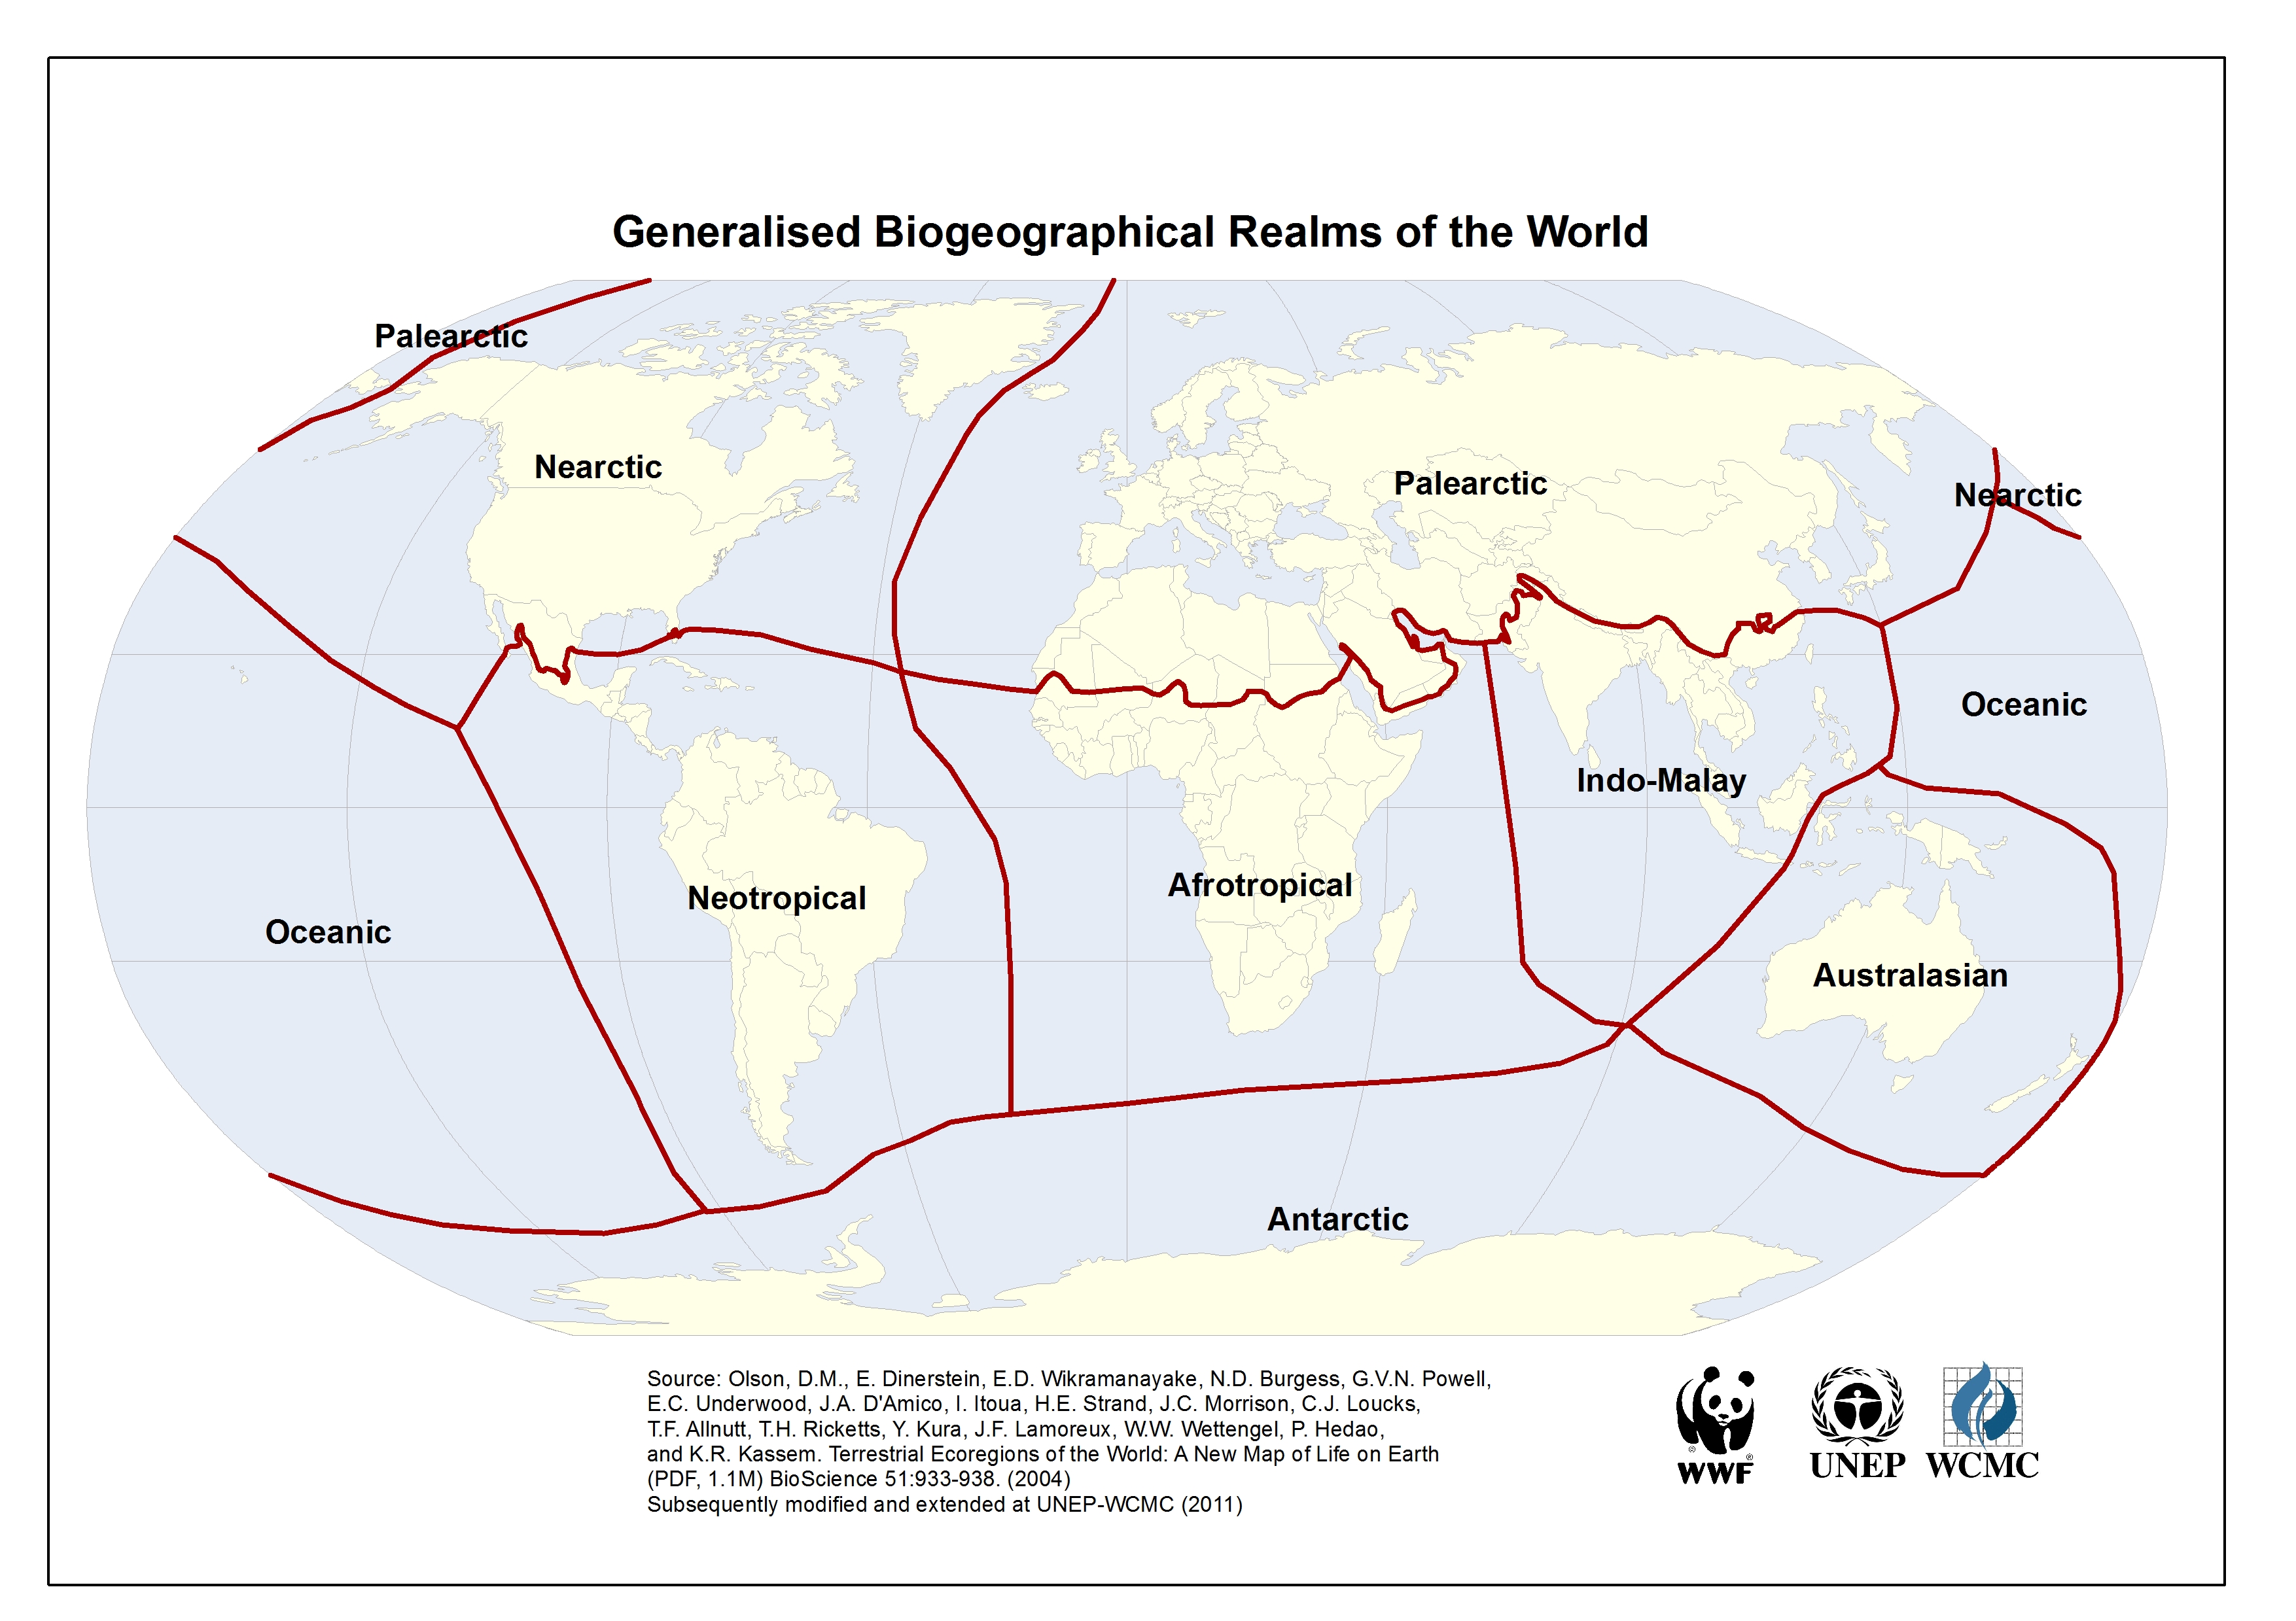 Udvardy (1975) delineated eight biogeographical regions of the world (see above) where organisms are distributed. The Philippines belongs in the Indo-Malay biogeographic province, which is known to be the planet's most diverse shallow marine area.